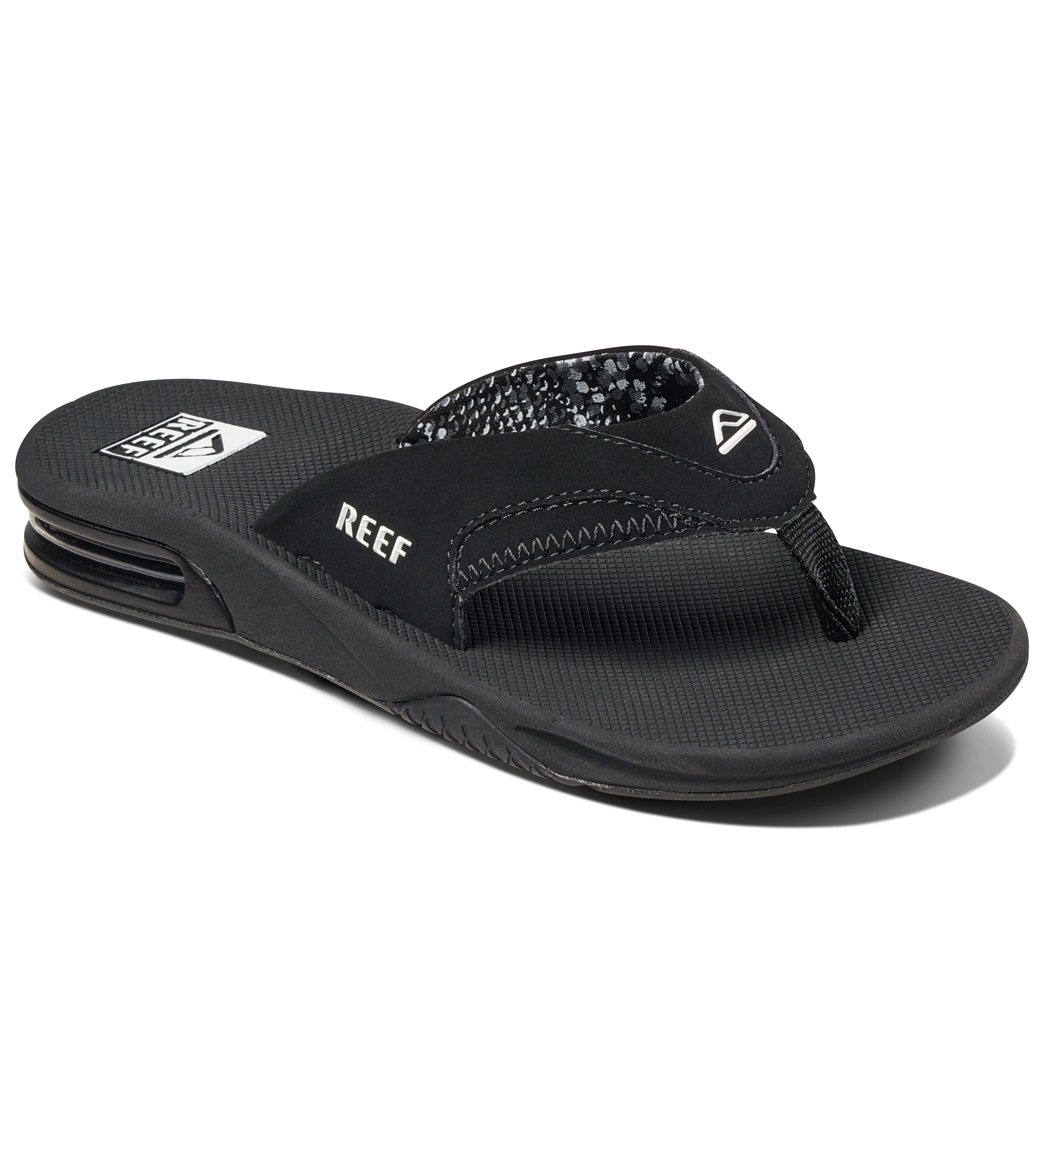 Reef Women s Fanning Flip Flop at SwimOutlet com Free Shipping